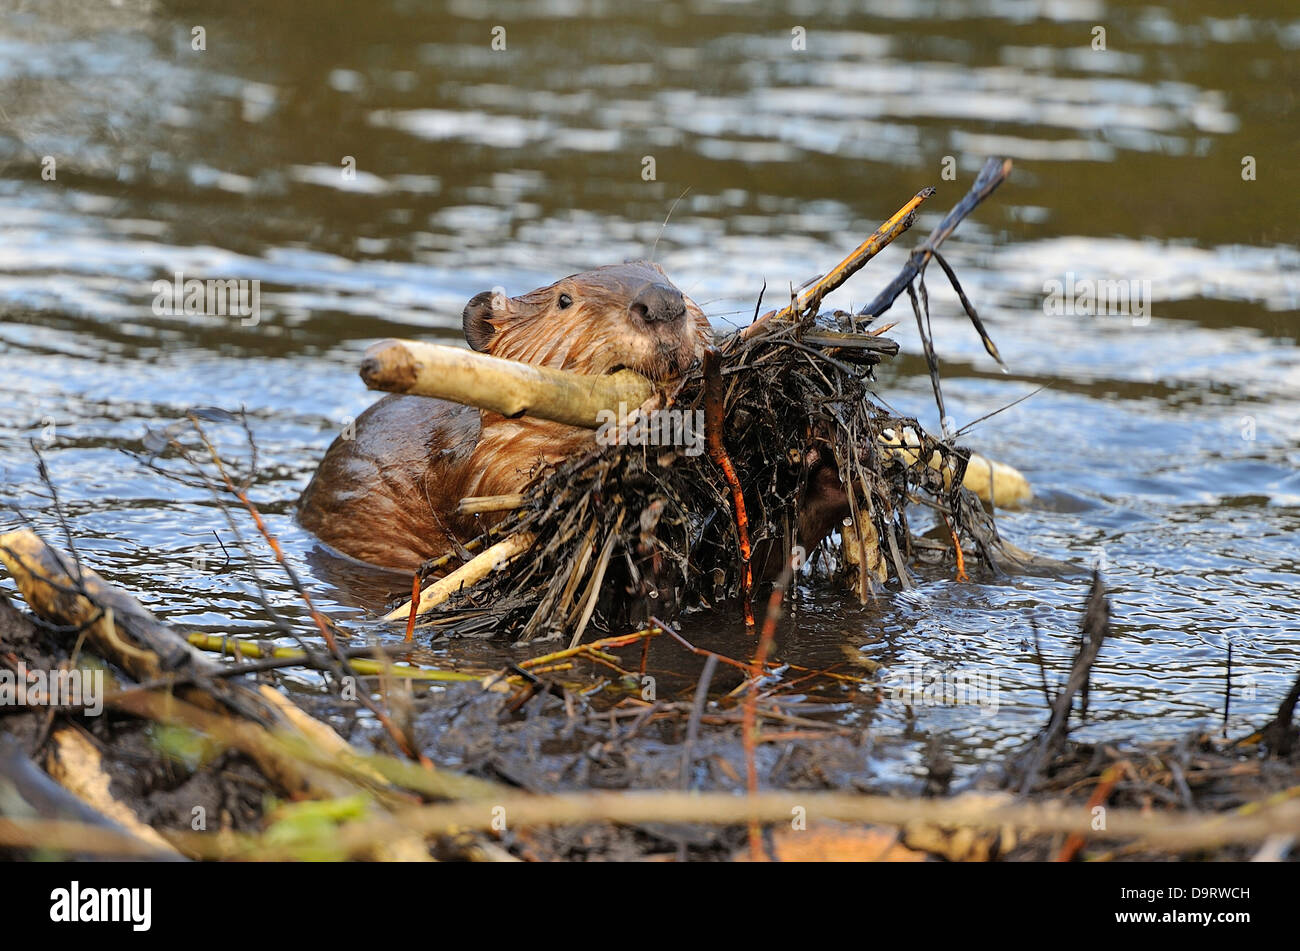 A beaver caring a load of sticks on the dam to plug off the excess water flow Stock Photo